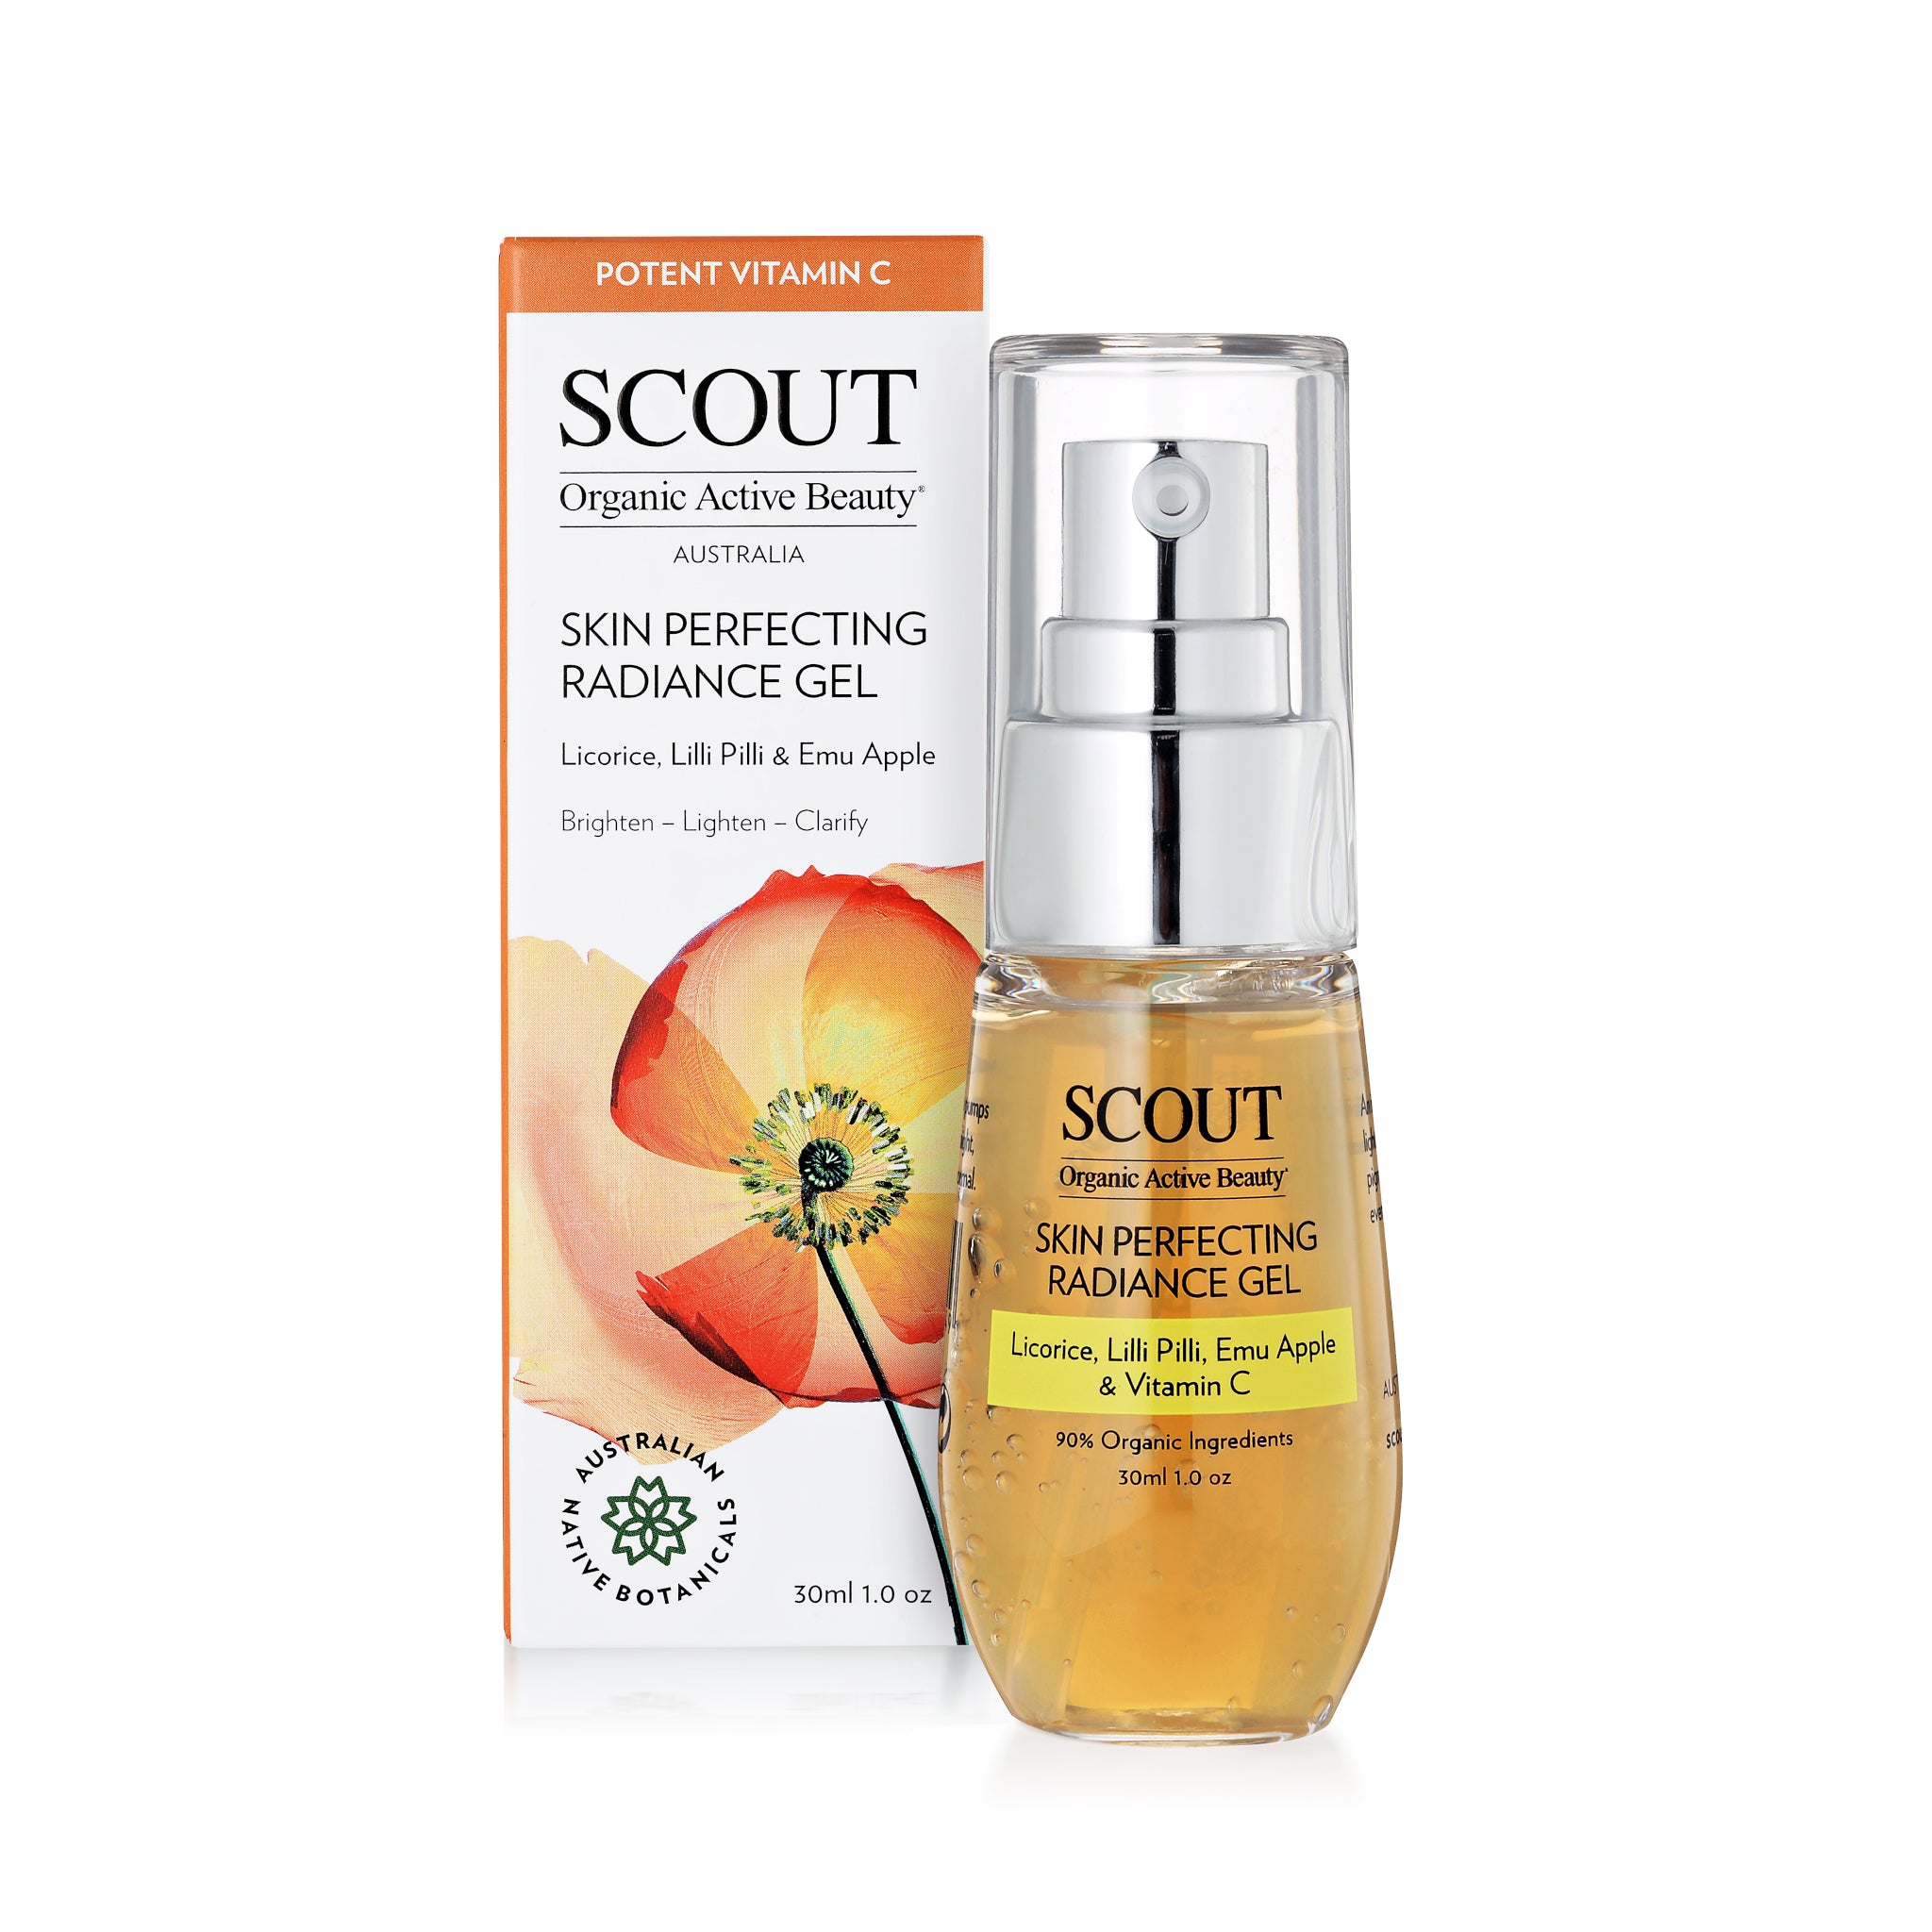 SCOUT Organic Active Beauty - Exciting New SCOUT Skincare Product: Skin Perfecting Radiance Gel